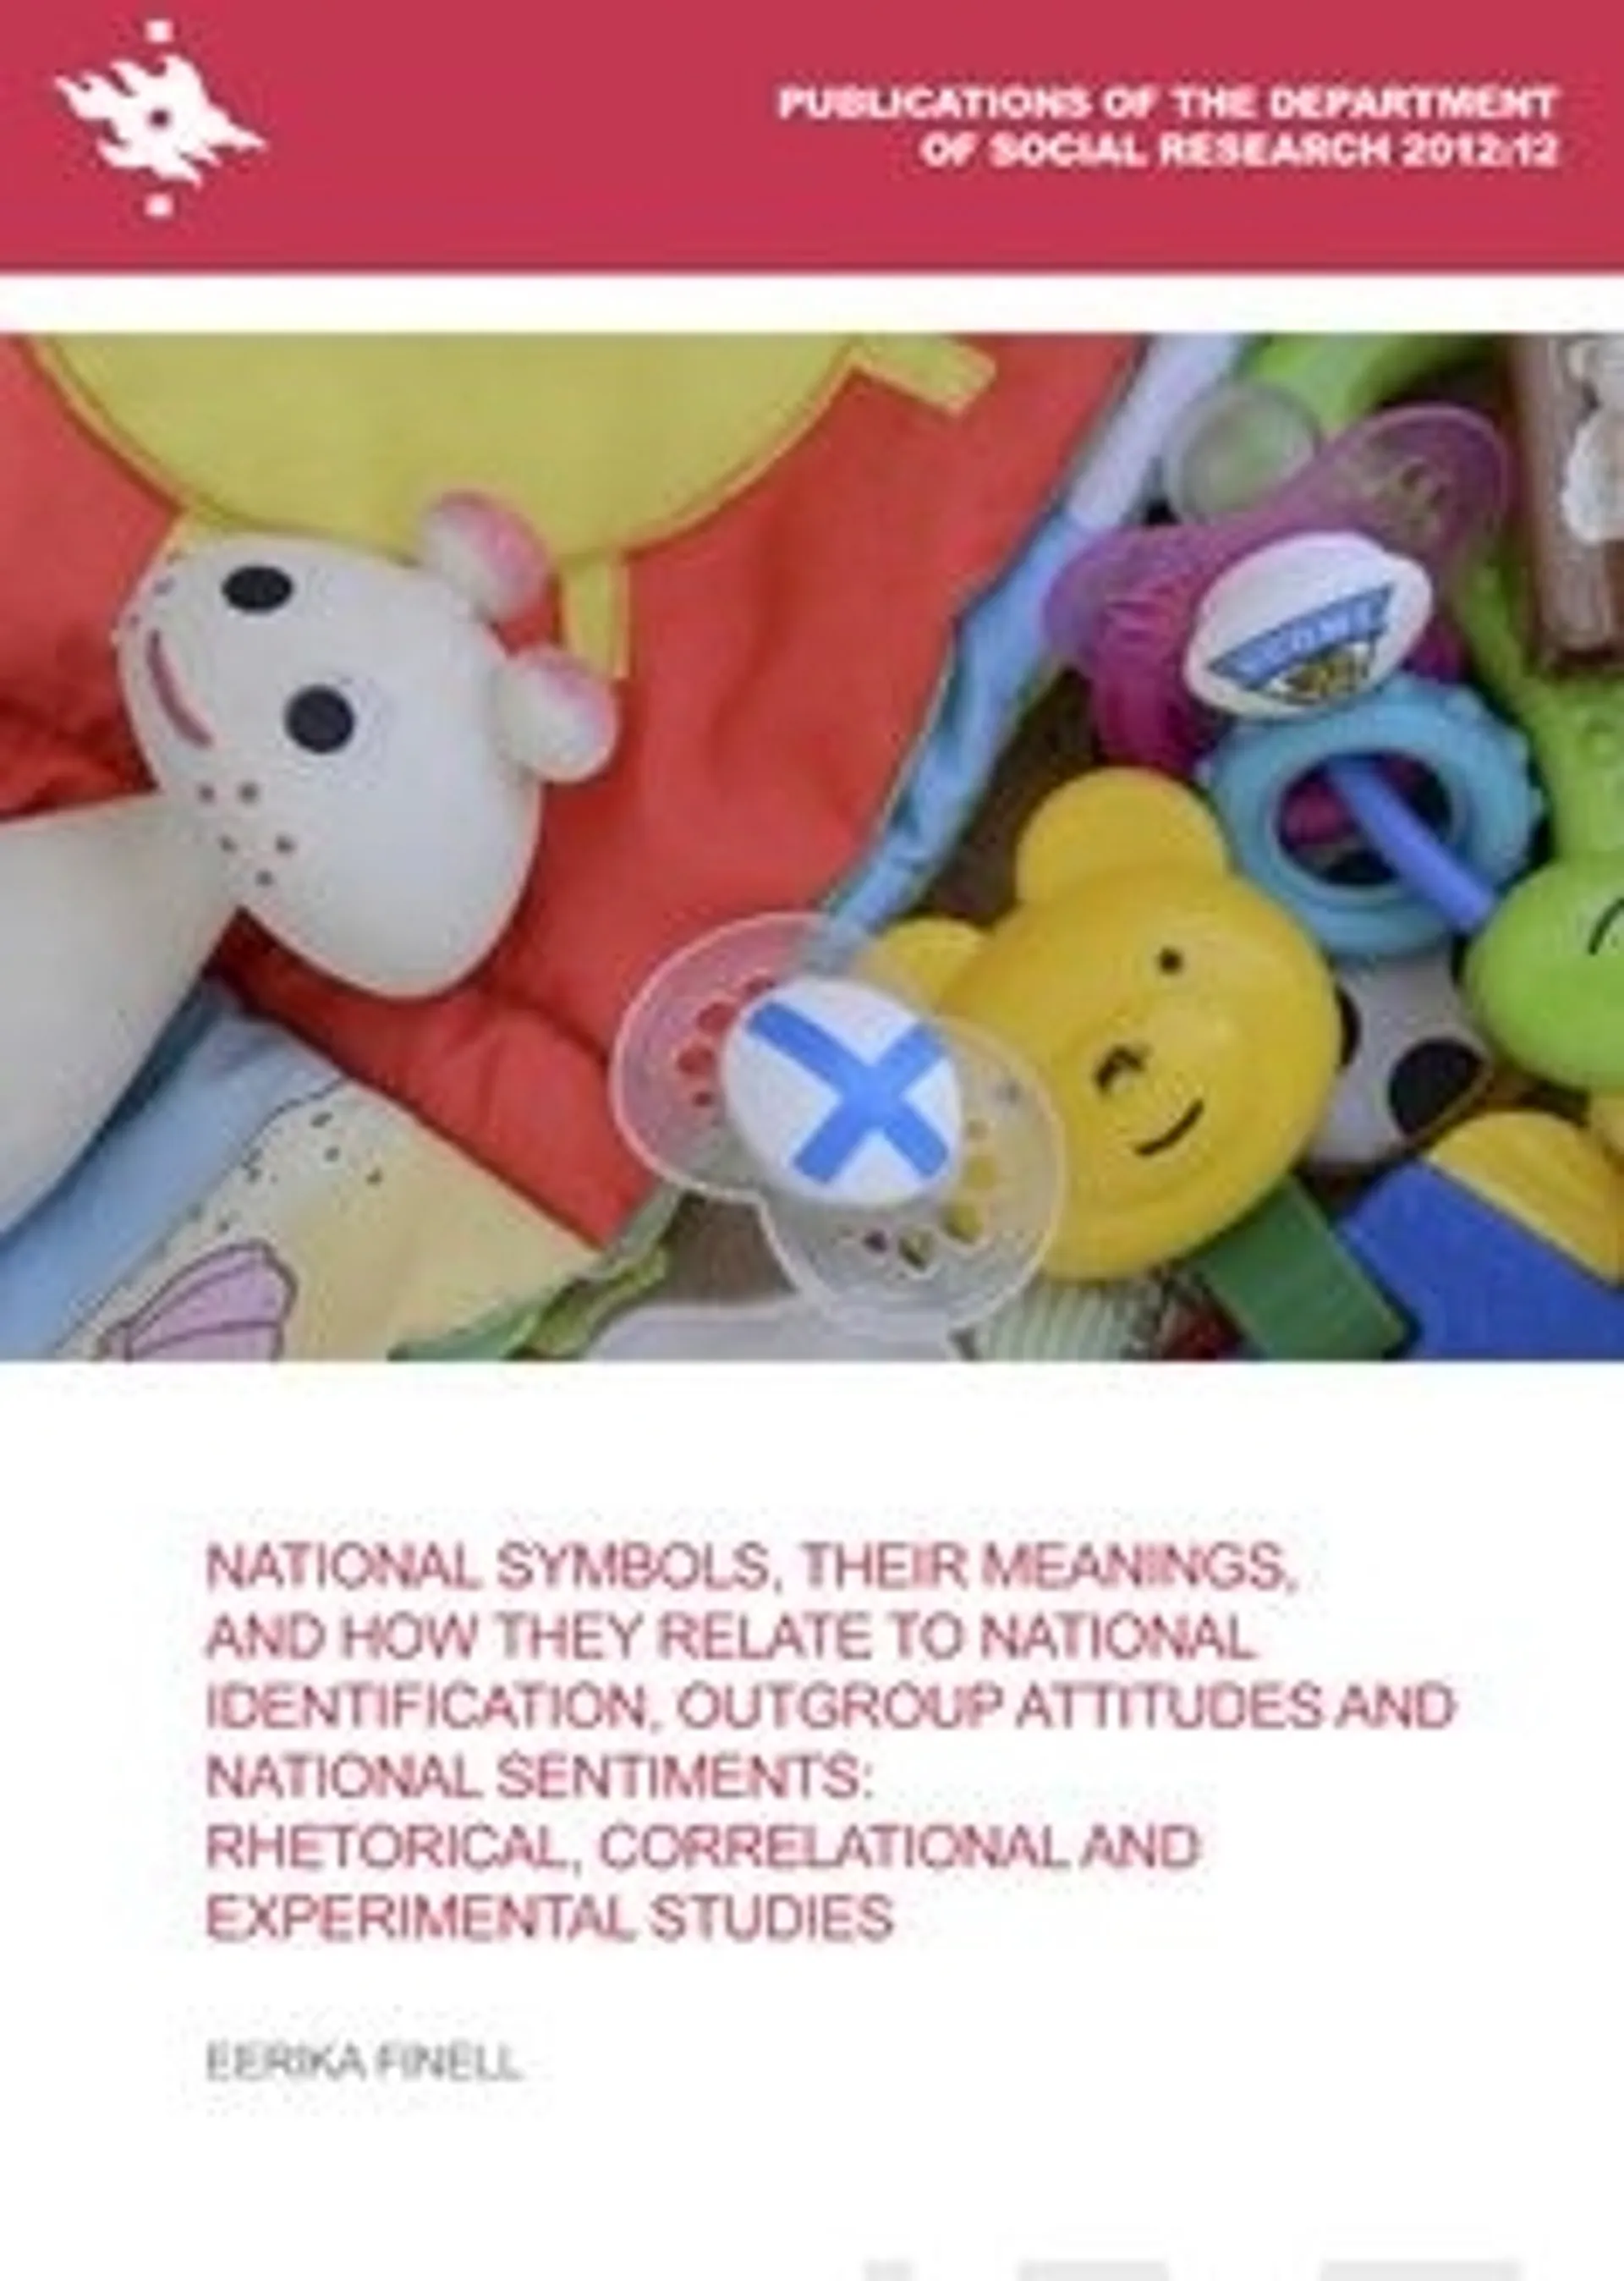 Finell, National Symbols, their meanings, and how they relate to National Identification, Outgroup Attituds and National Sentiments